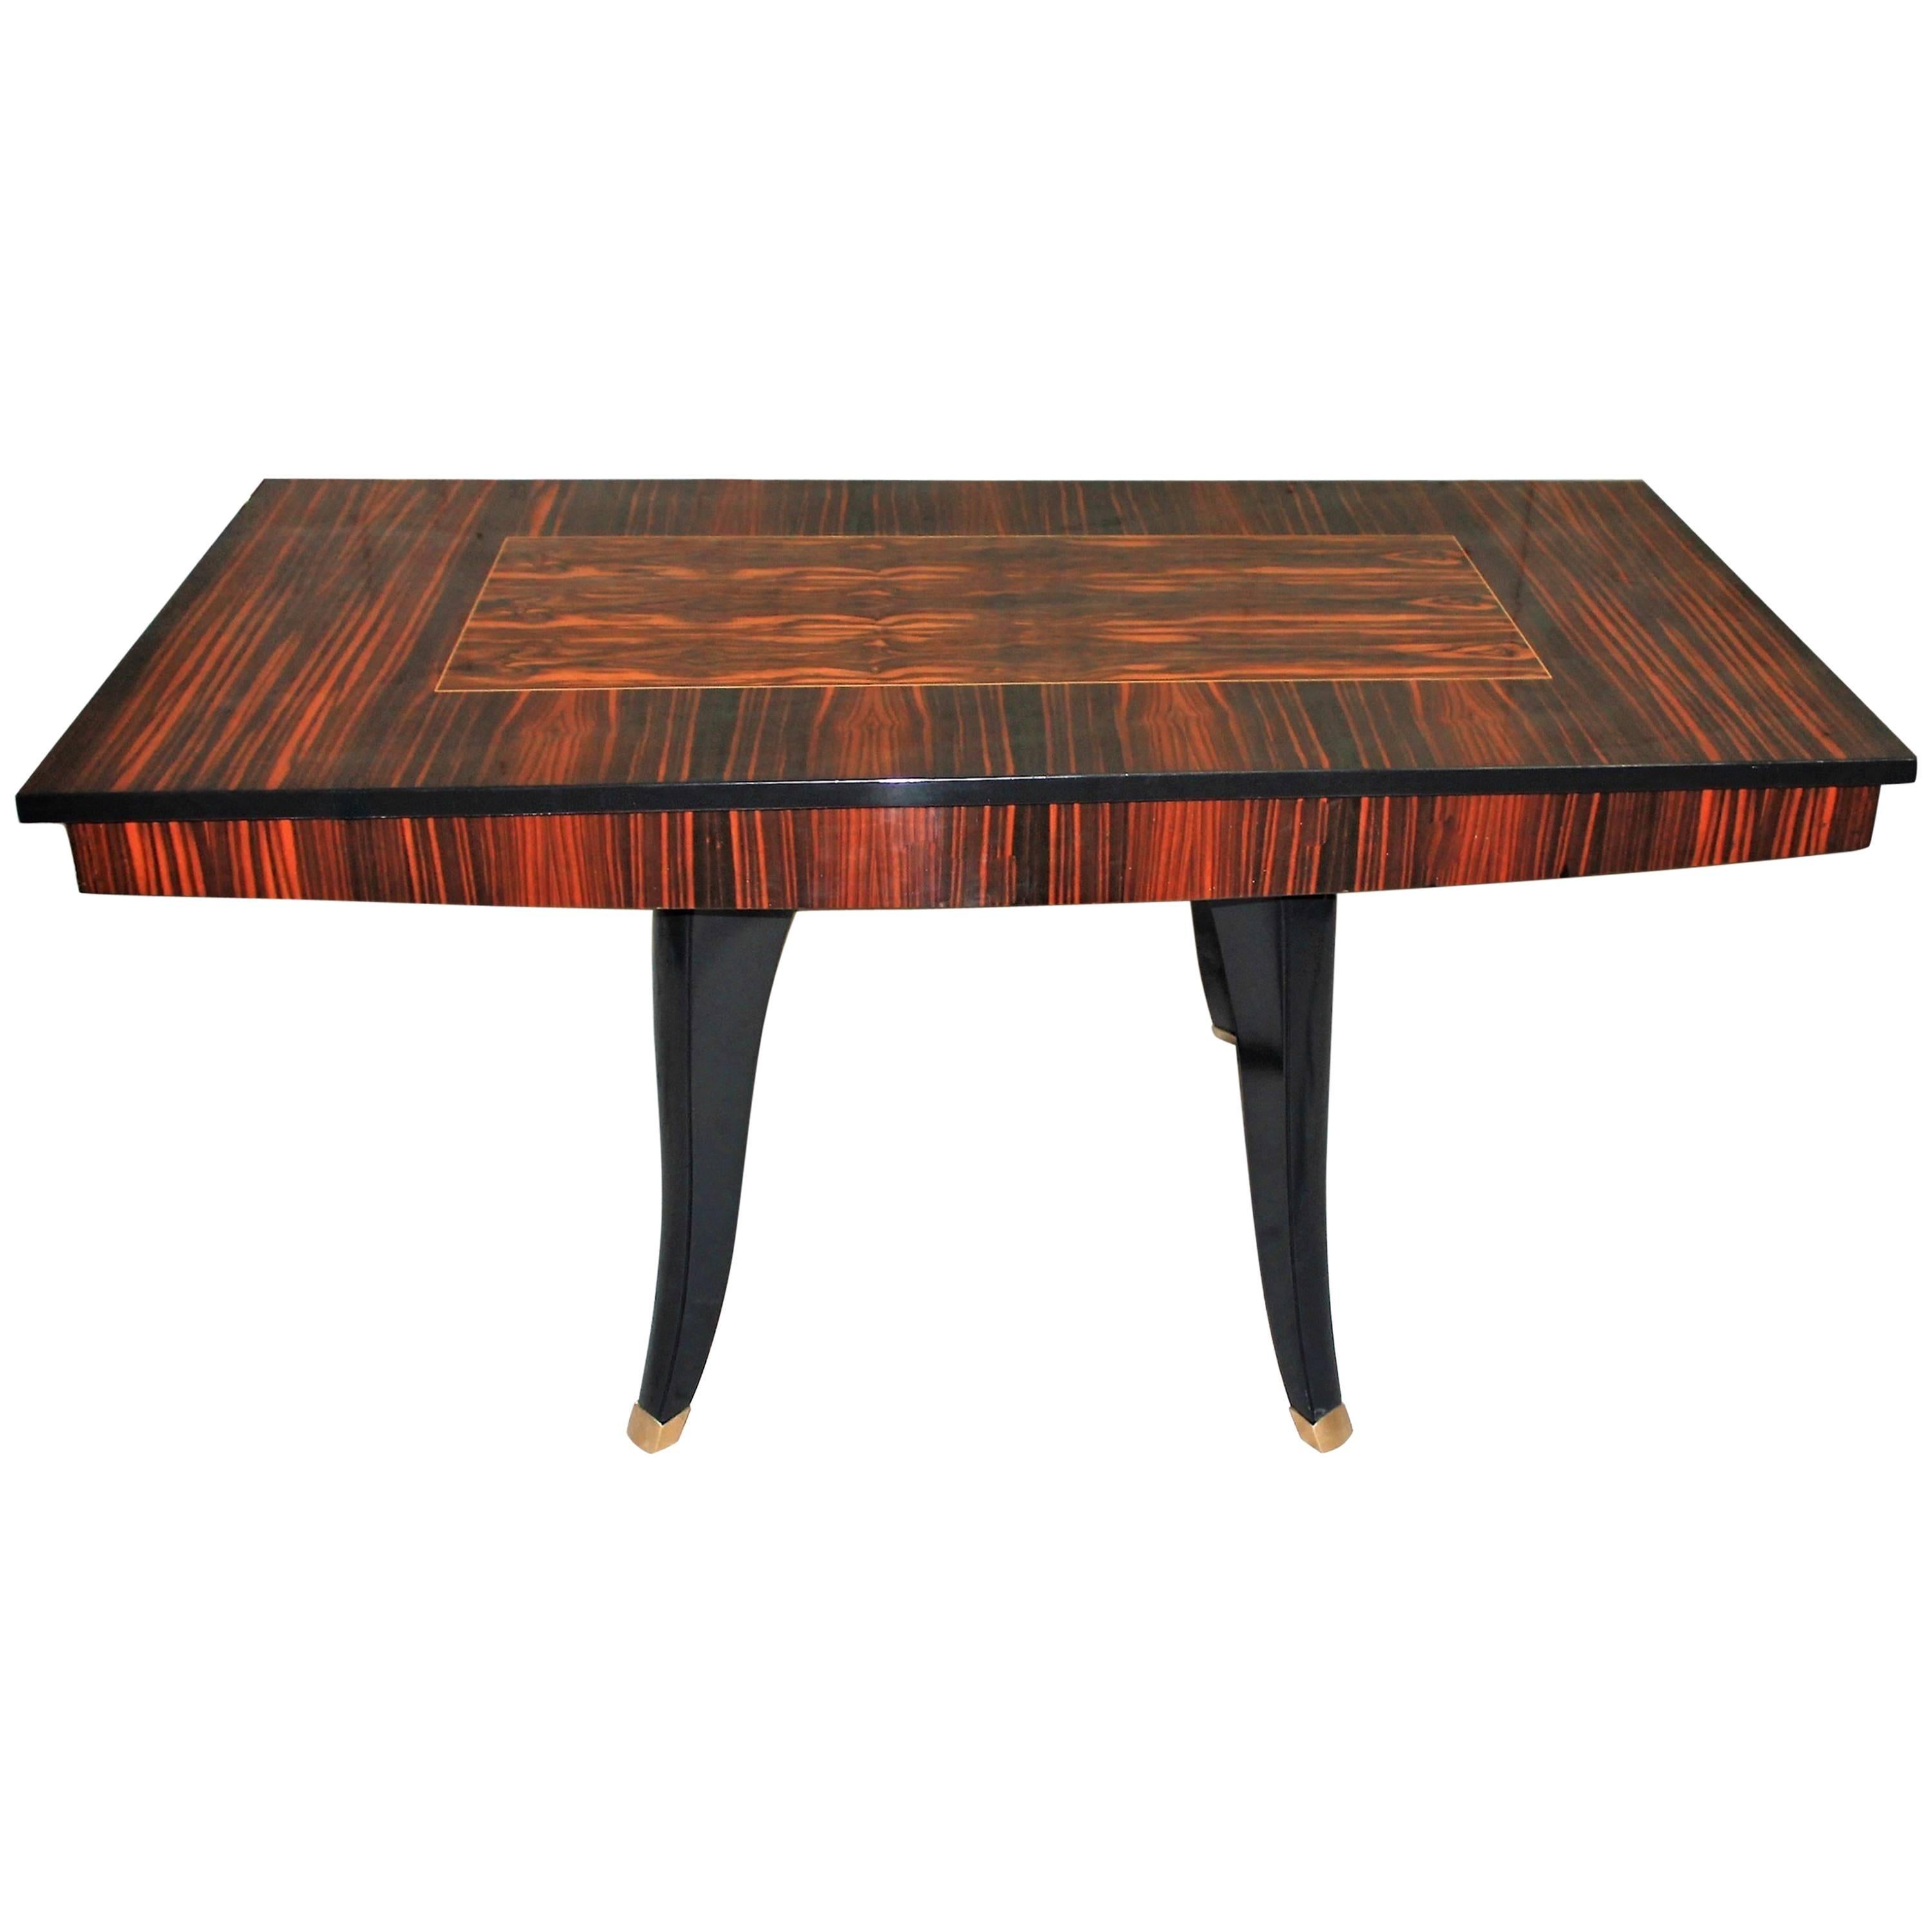 Monumental French Art Deco Macassar Centre Table or Dining Table, circa 1940s